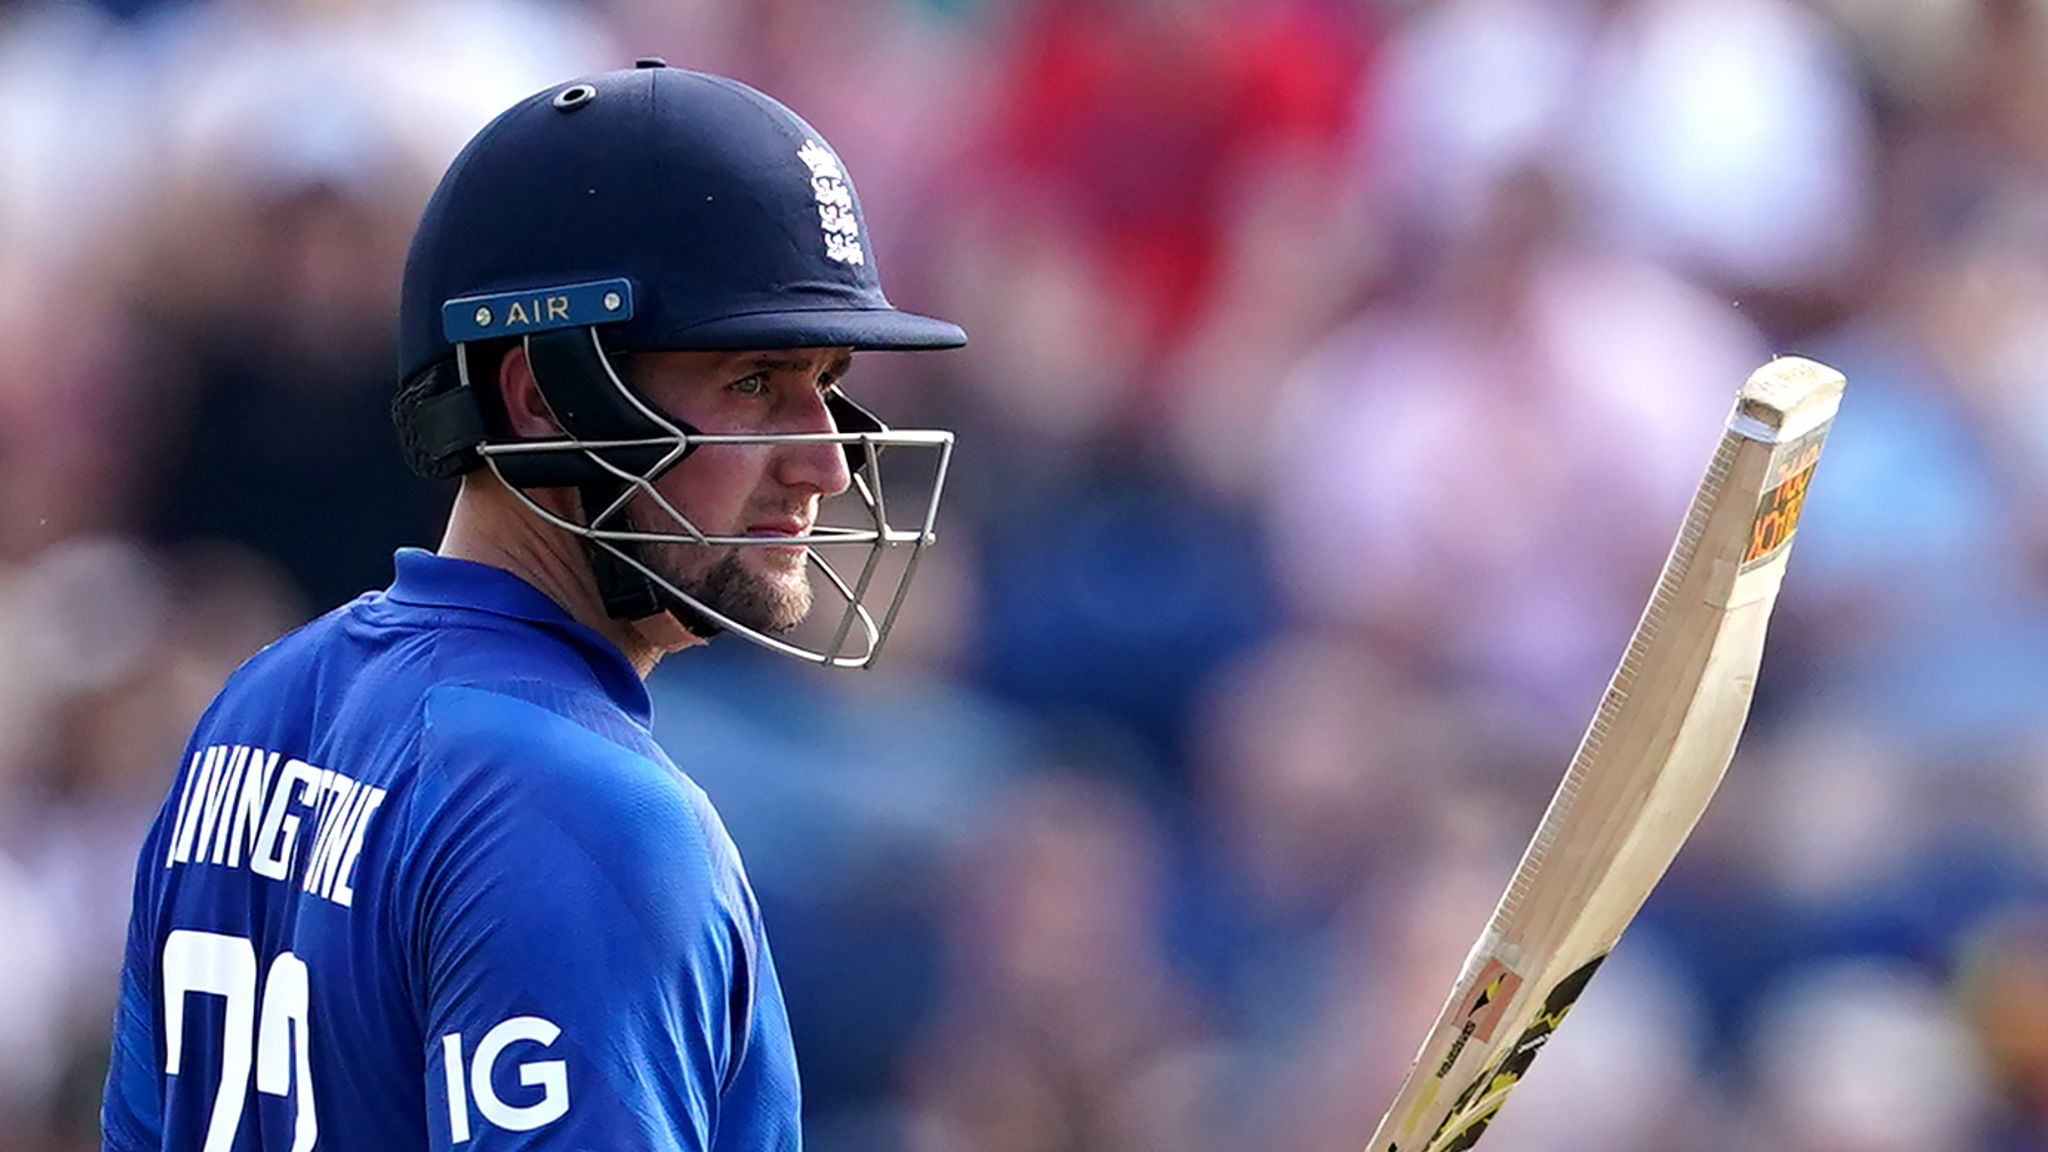 ENG vs NZ: [WATCH] Liam Livingstone’s Smashes Sixes Off Kyle Jamieson